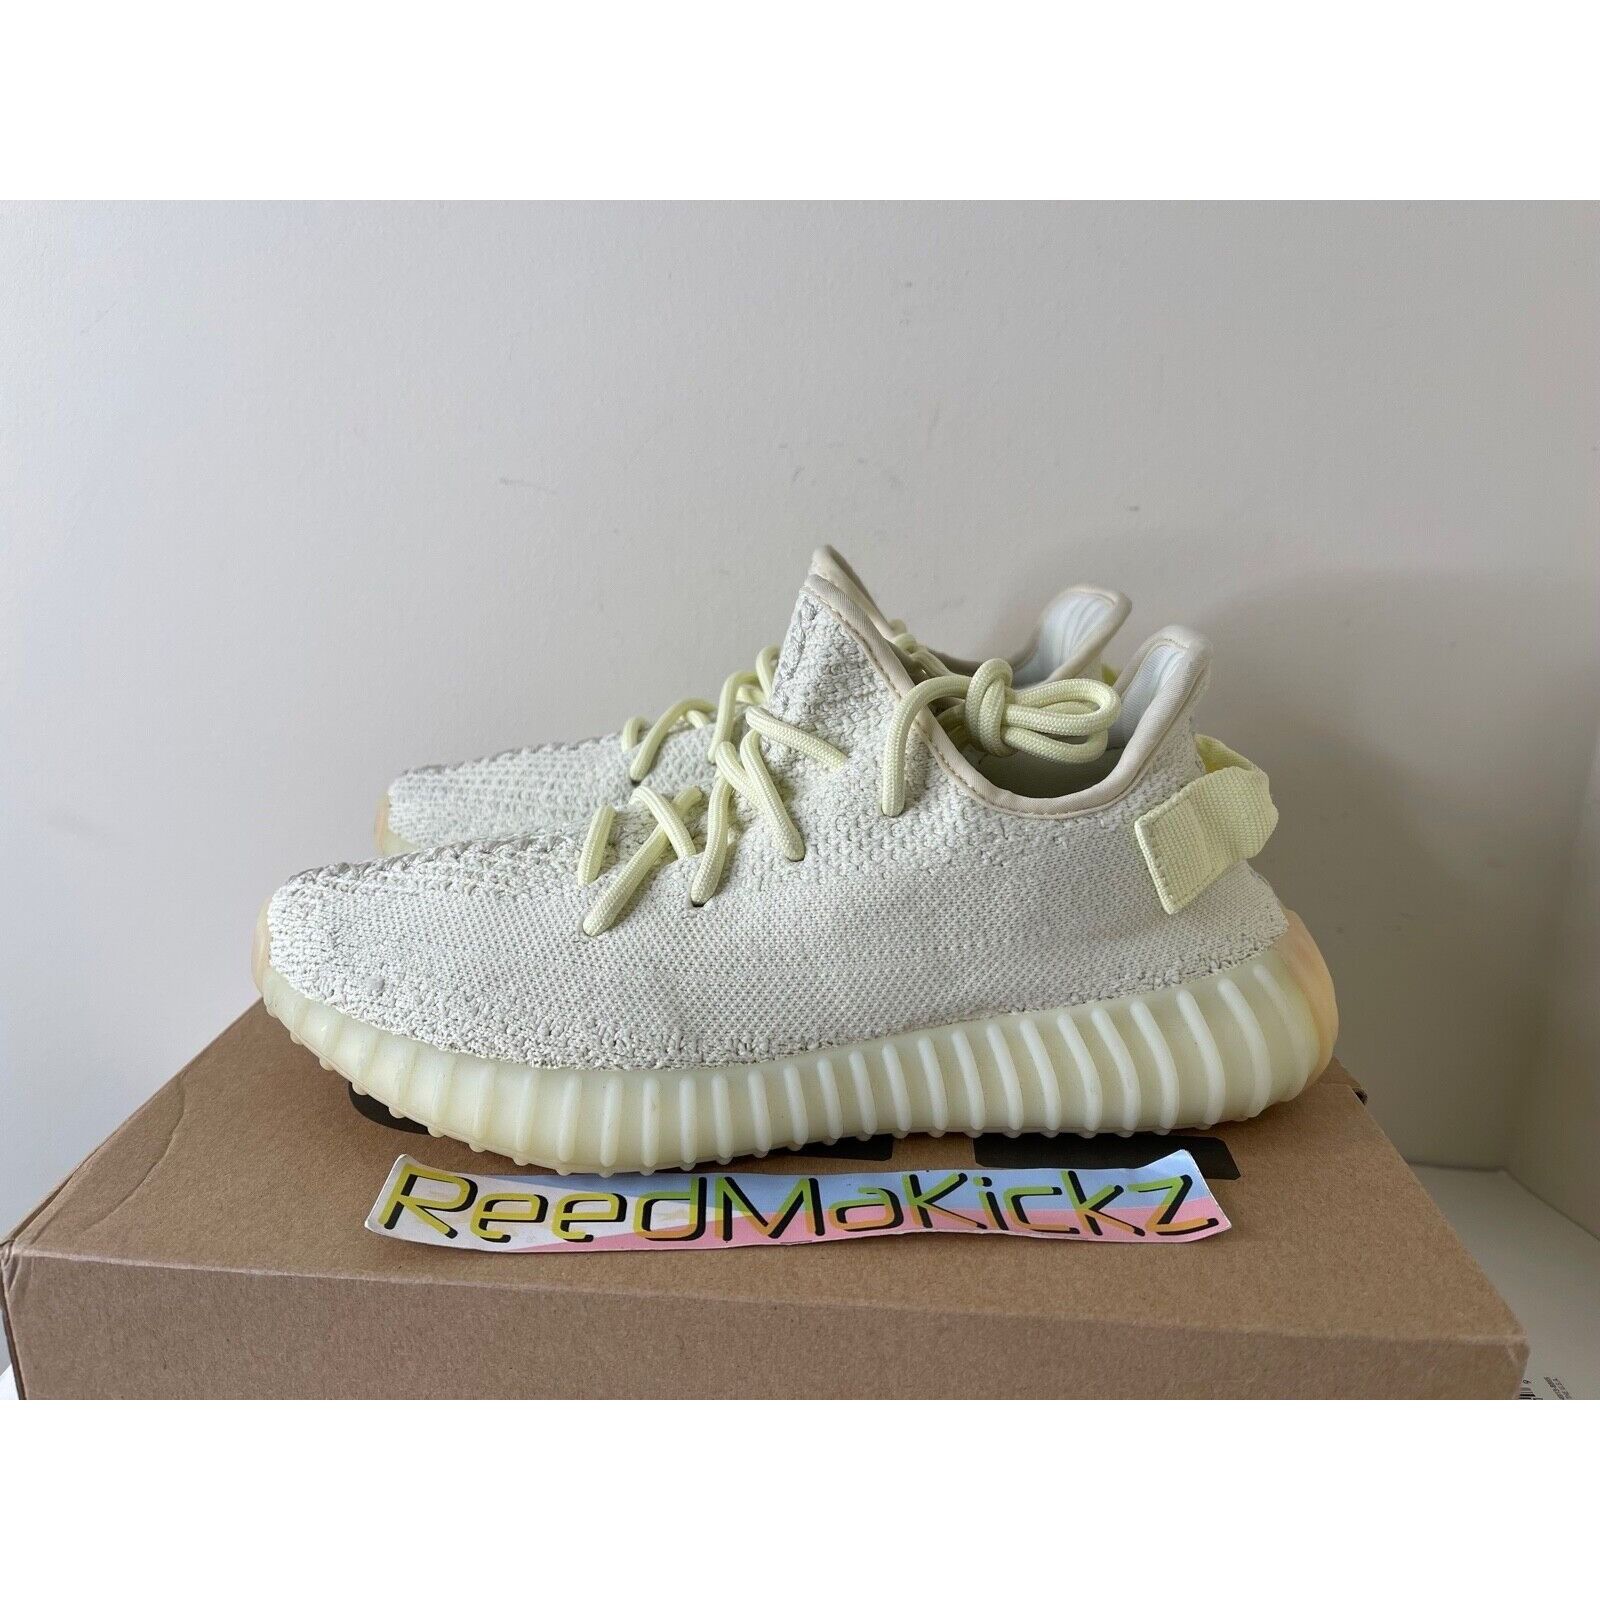 Adidas Yeezy Boost 350 V 2 Butter | Grailed